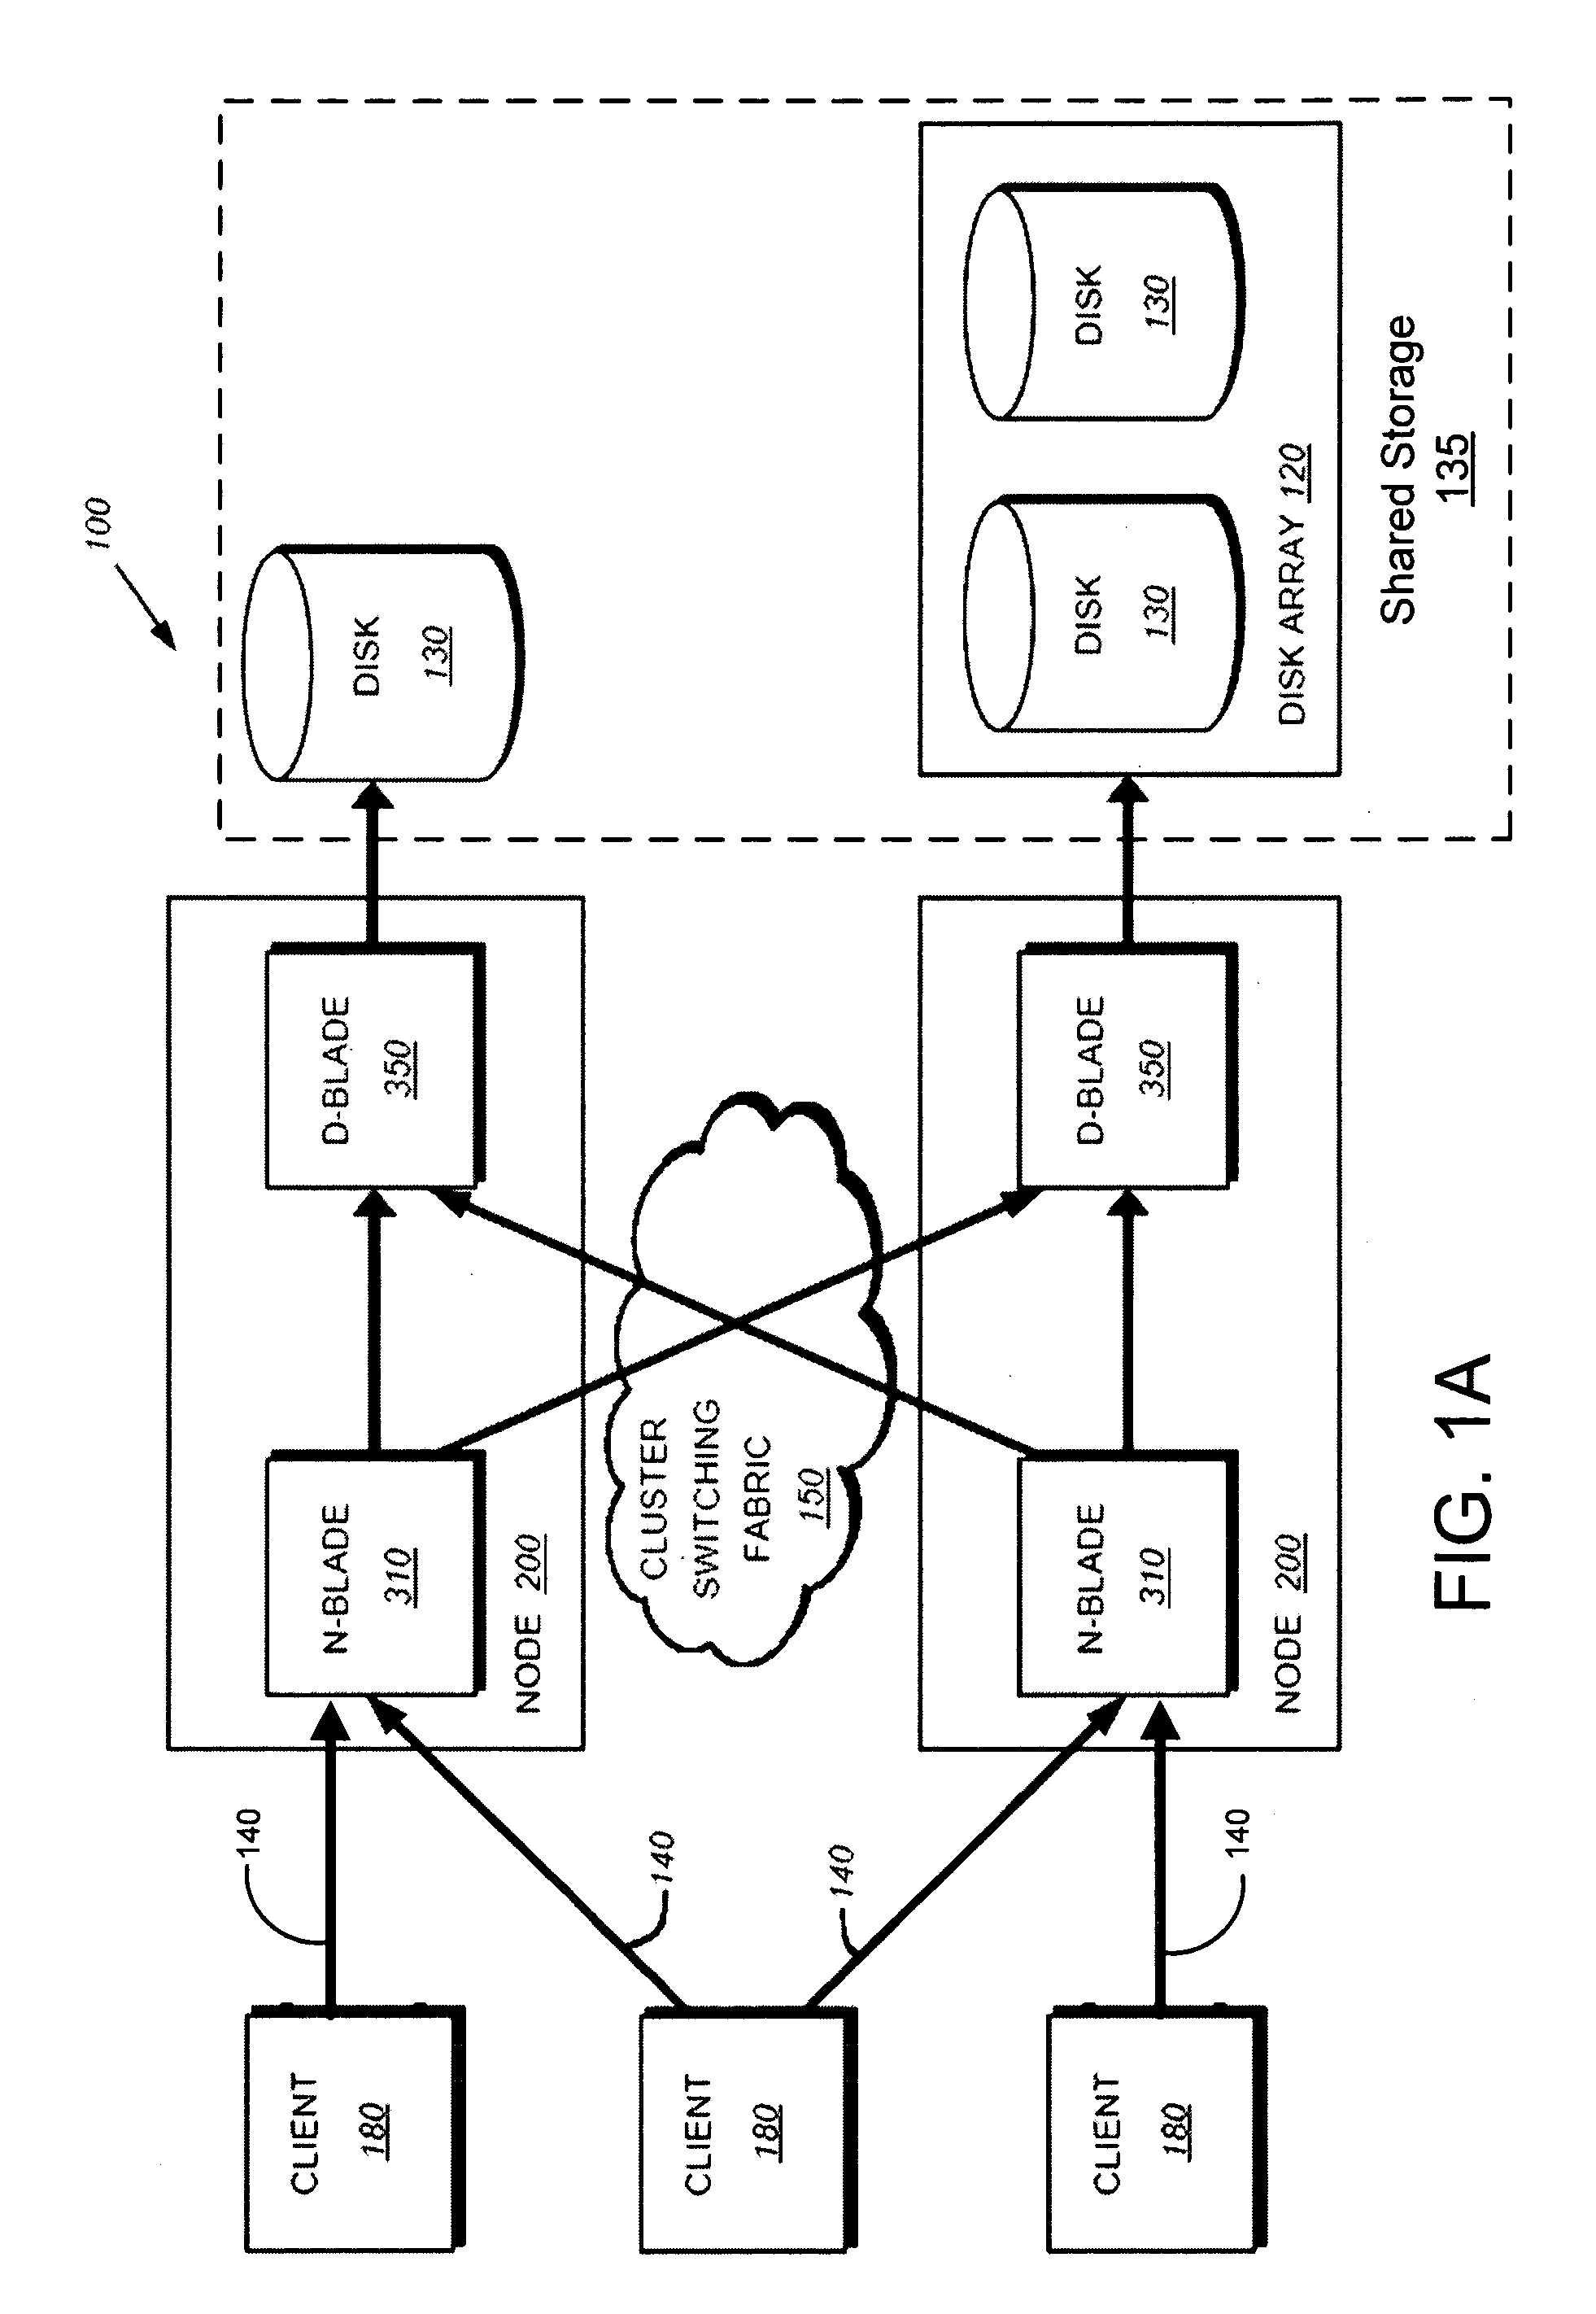 Processing and distributing write logs of nodes of a cluster storage system